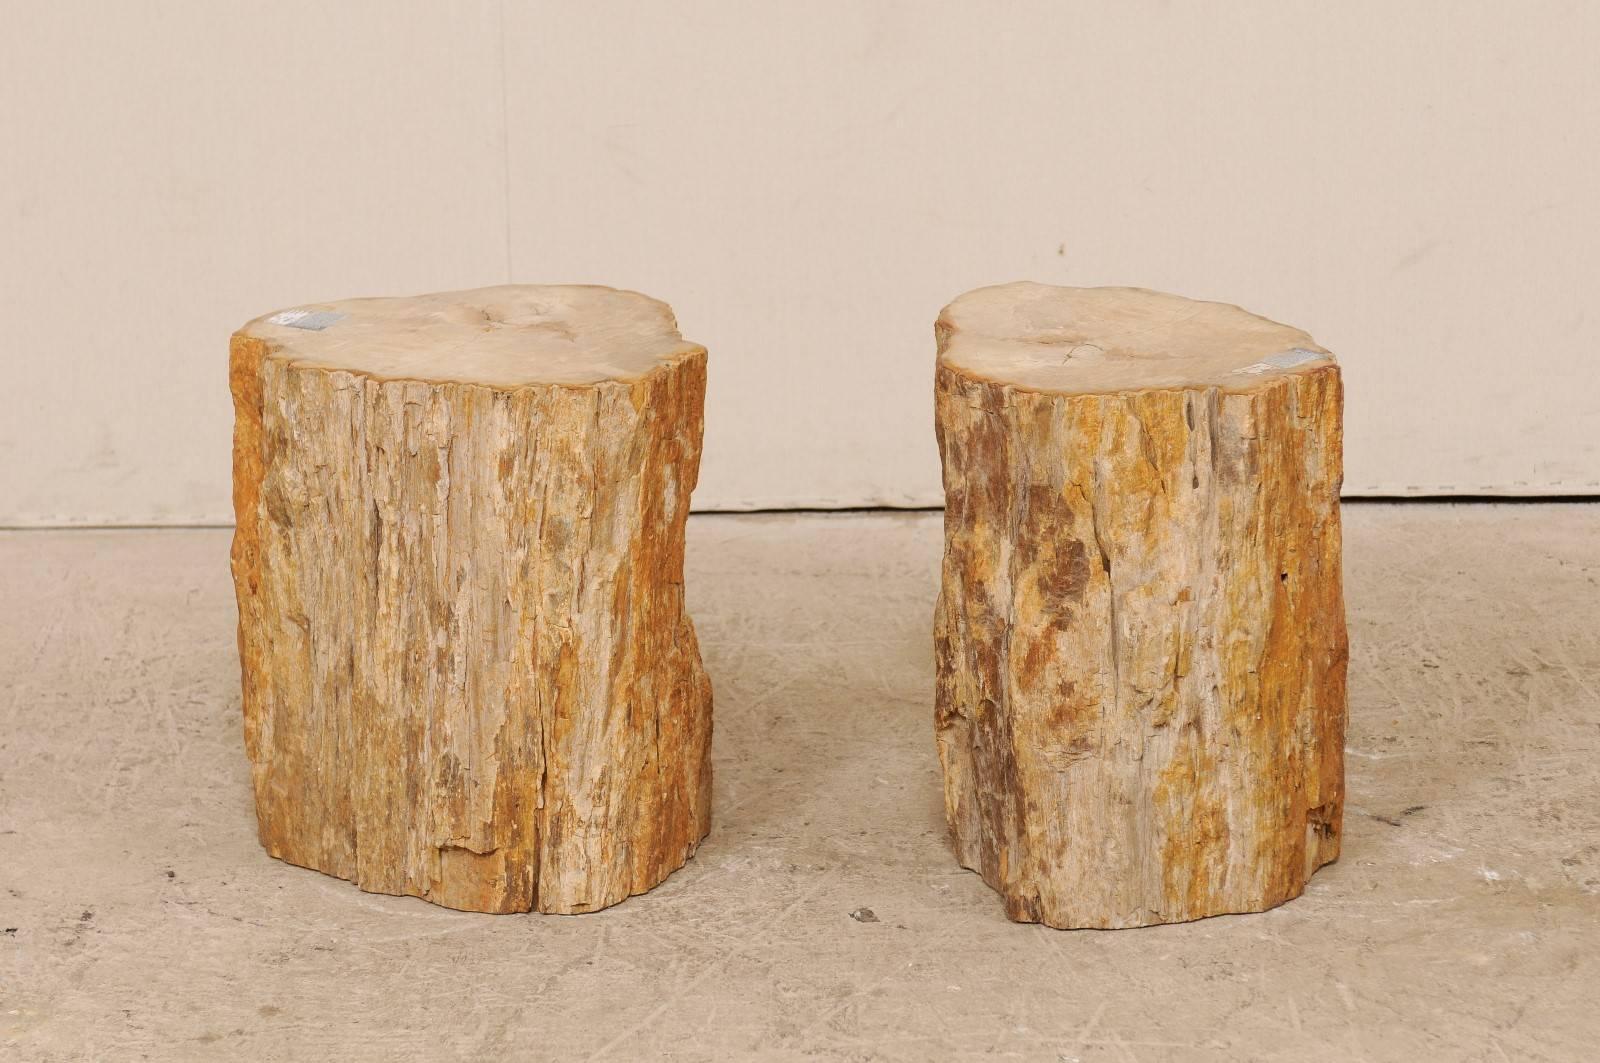 A pair of medium-warm toned petrified wood drinks tables. This pair of petrified wood drinks tables features a polished top finish and beautifully naturally textured sides. Petrified wood is a fossil. Over time, the petrified wood becomes so sturdy